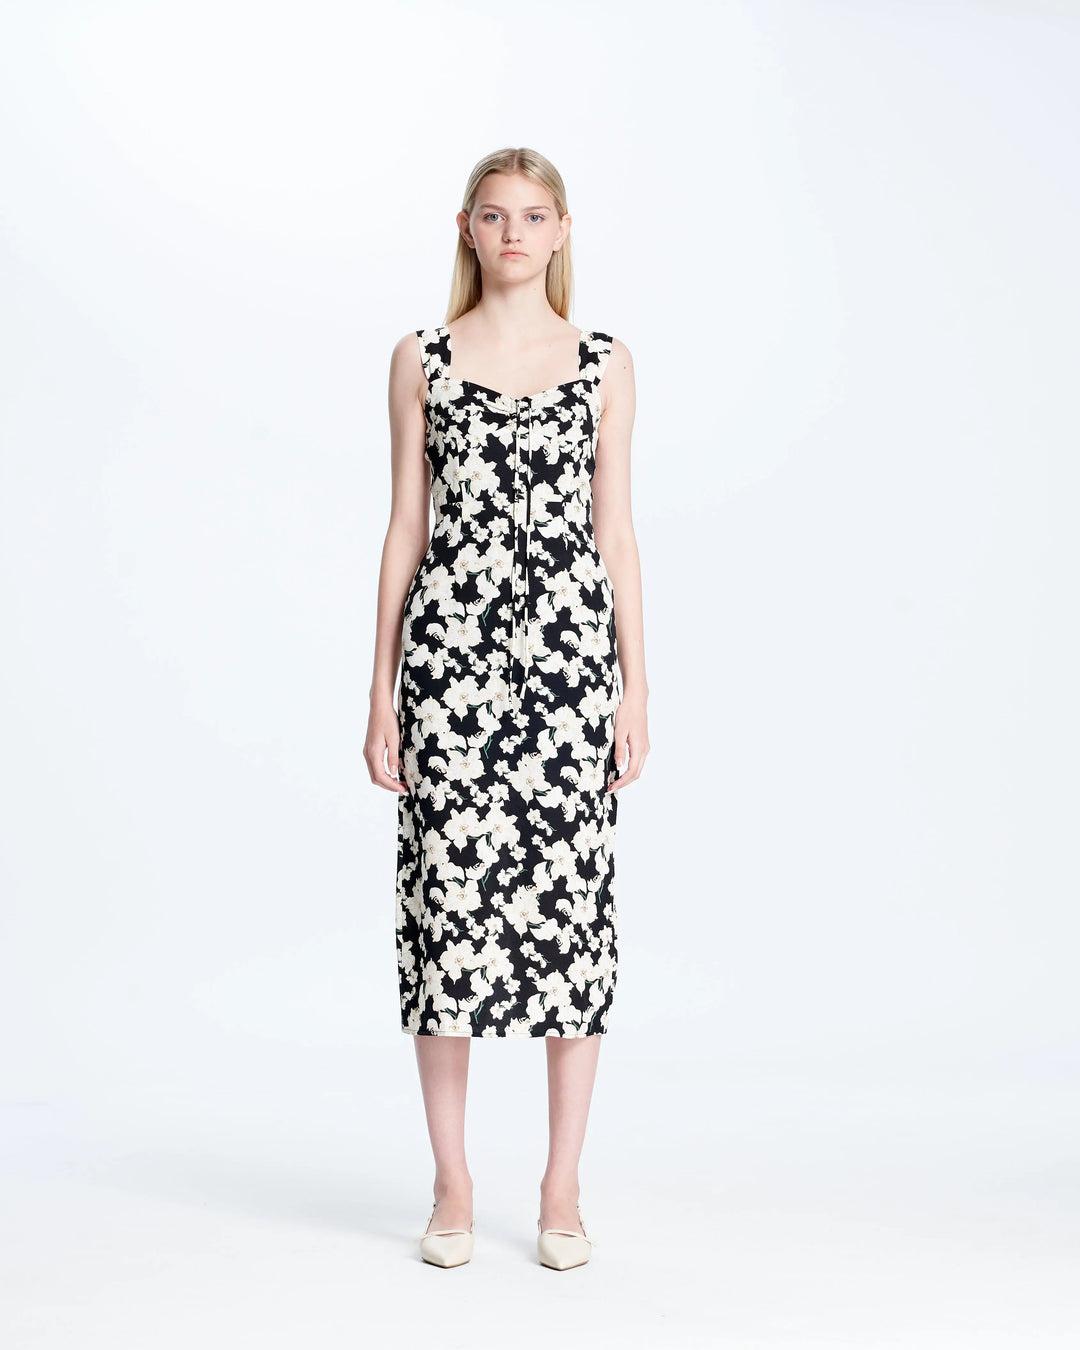 An image of a  Black-Small M16111 Floral Slip Dress by  Mirra Masa